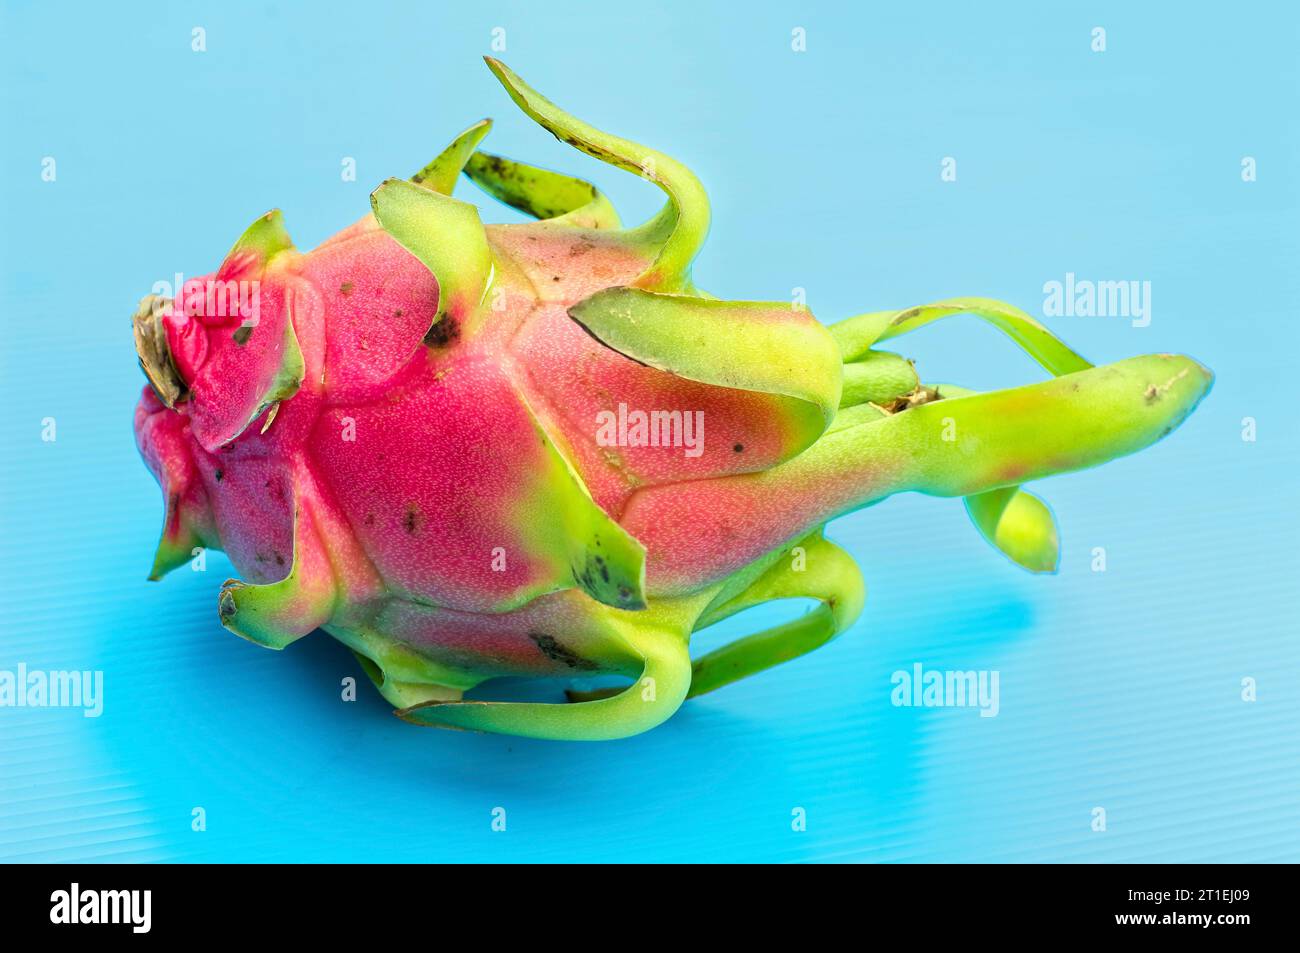 Half a Dragon Fruit with a Spoon Stuck in It Stock Photo